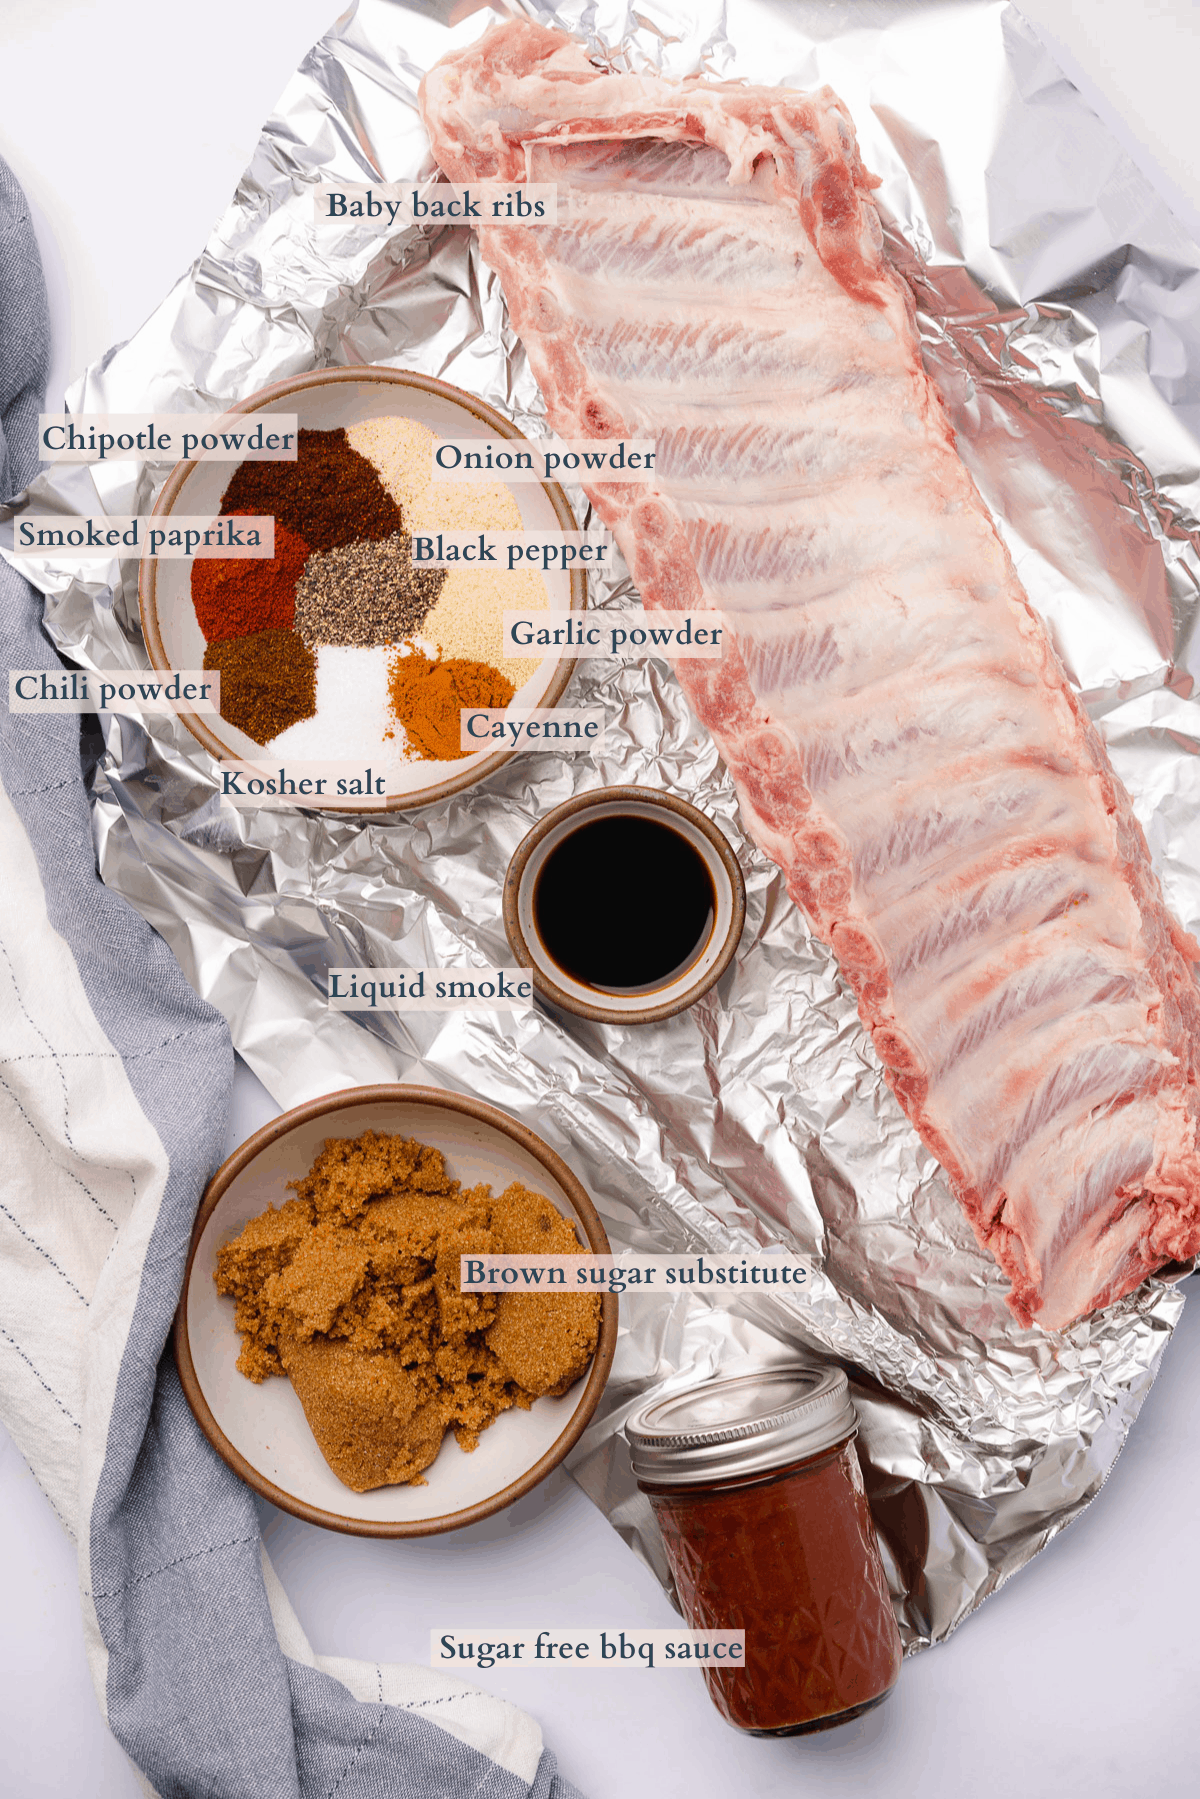 keto oven baked ribs ingredients with text to denote different ingredients